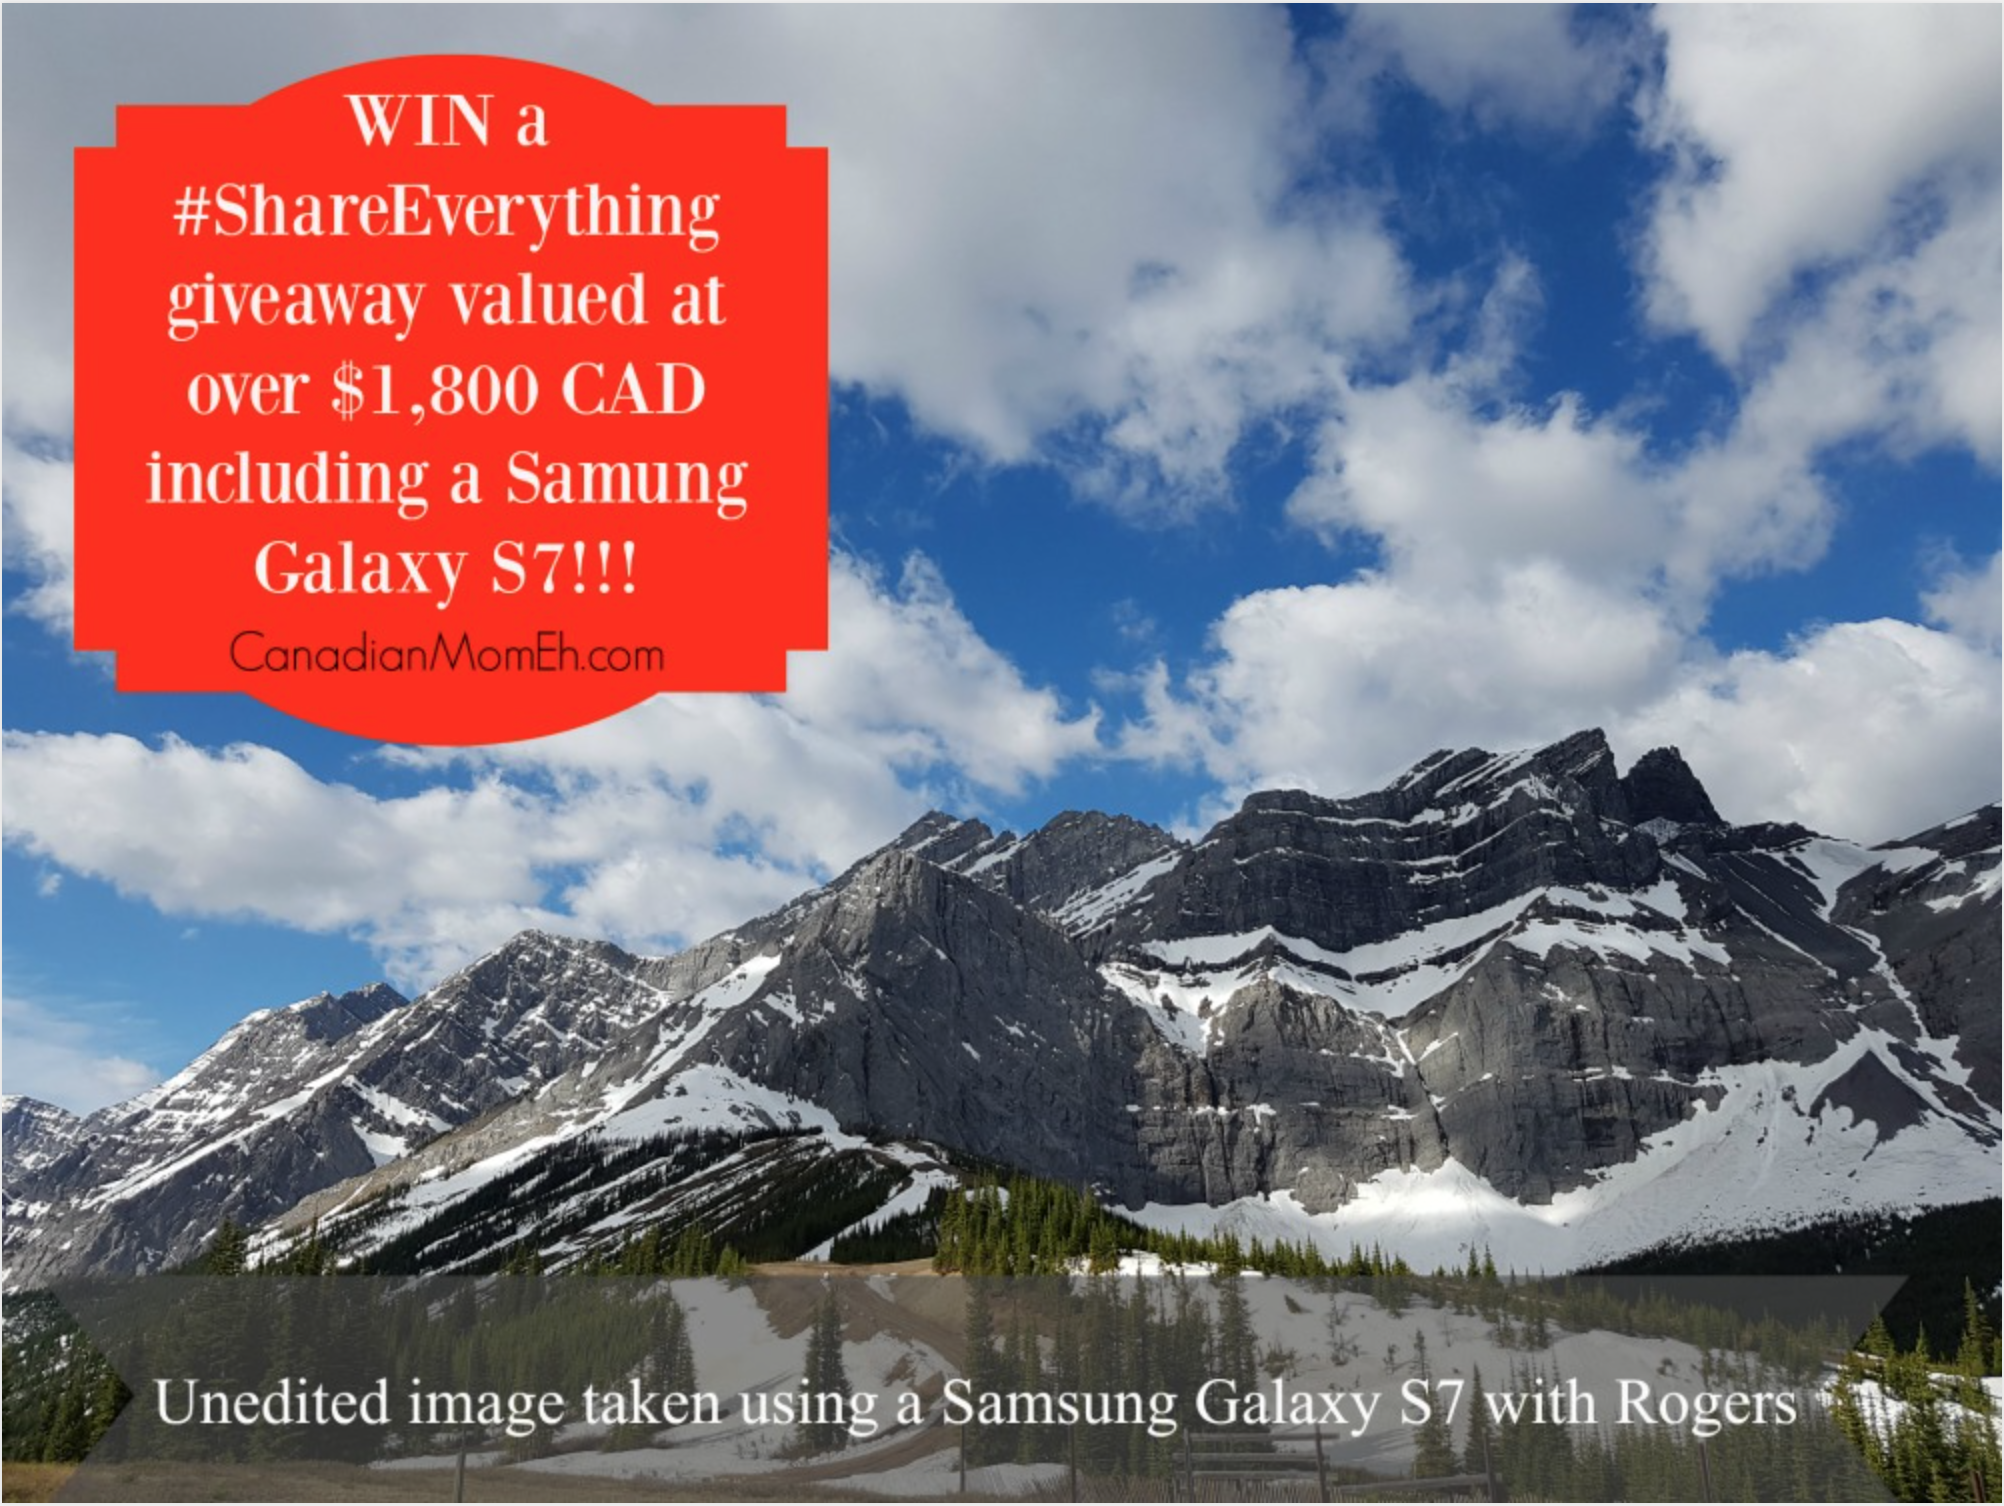 share everything, rogers, samsung, samsung galaxy s7, win a samsung galaxy s7, how can i get a free samsung galaxy s7